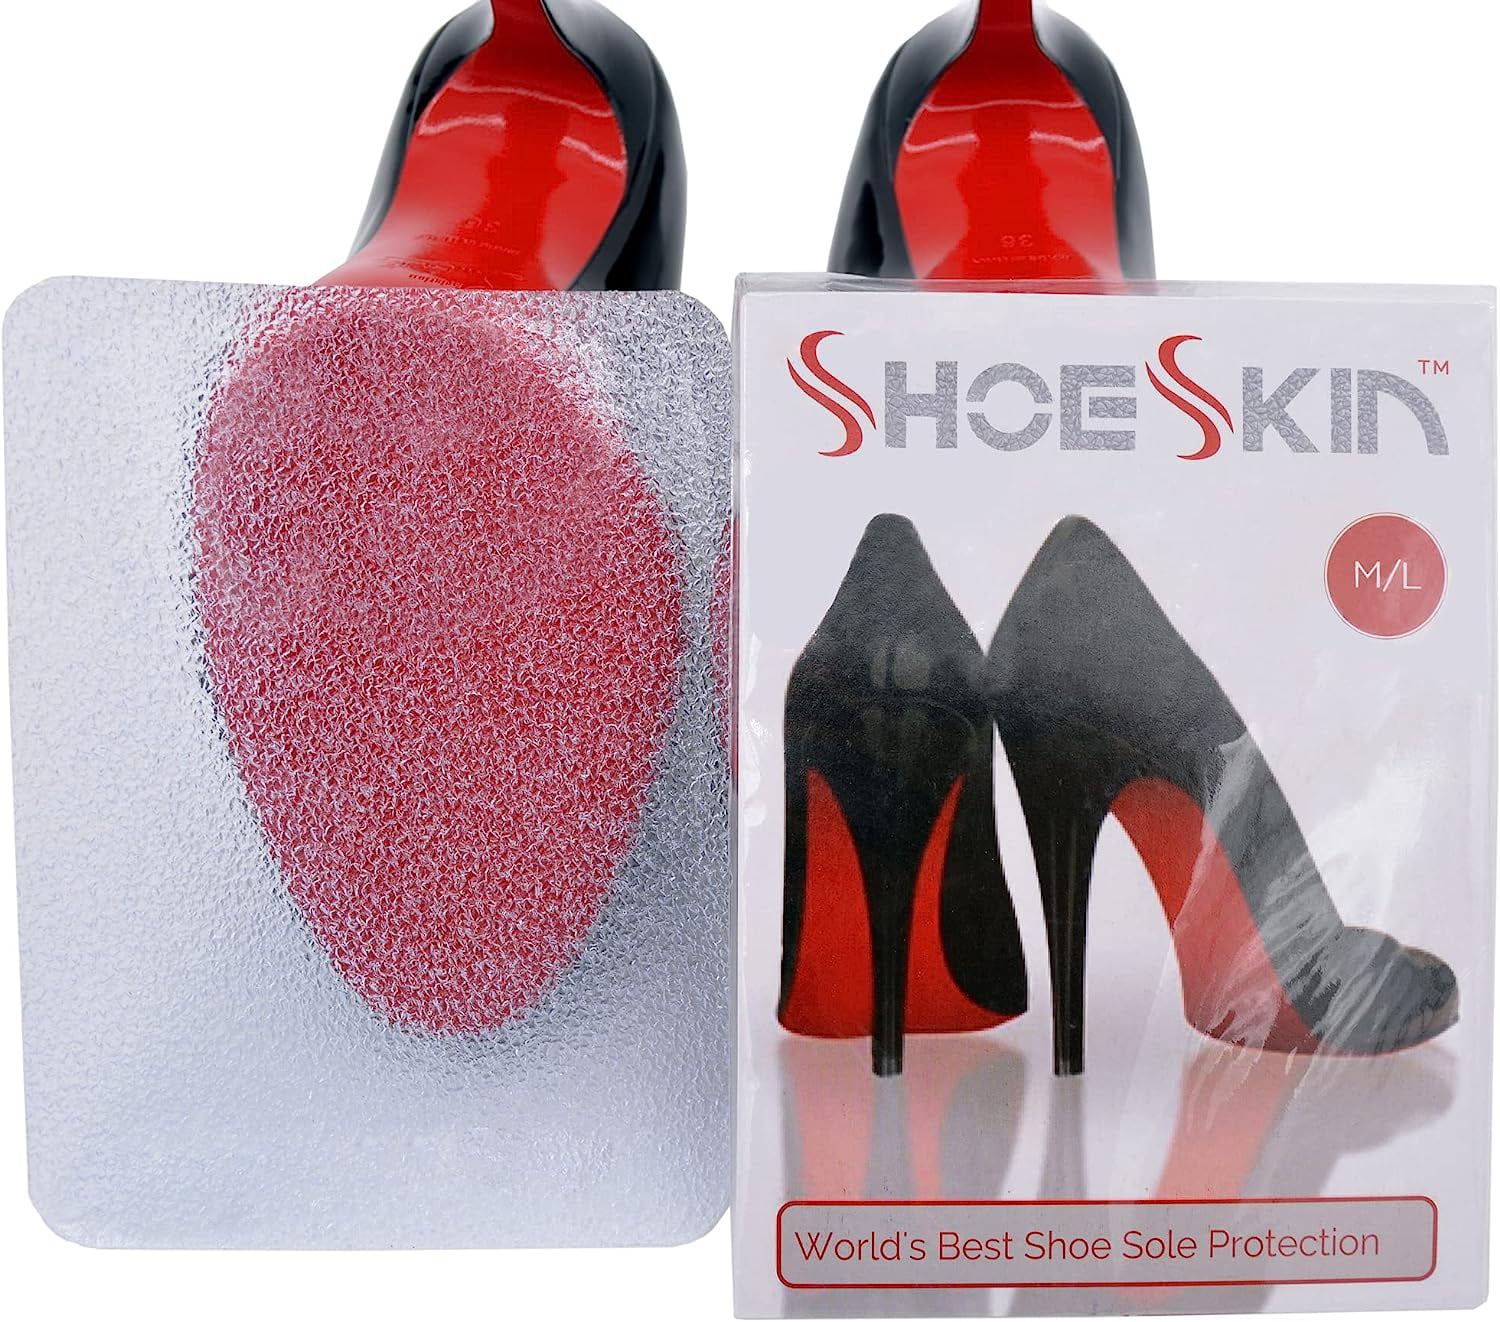  Solemates Sole Guard - 1 Set Pack (2 Sheets) - 4x6 Crystal  Clear 3M Sole Sticker and Sole Protector for Christian Louboutin, Jimmy  Choo and Designer Shoes